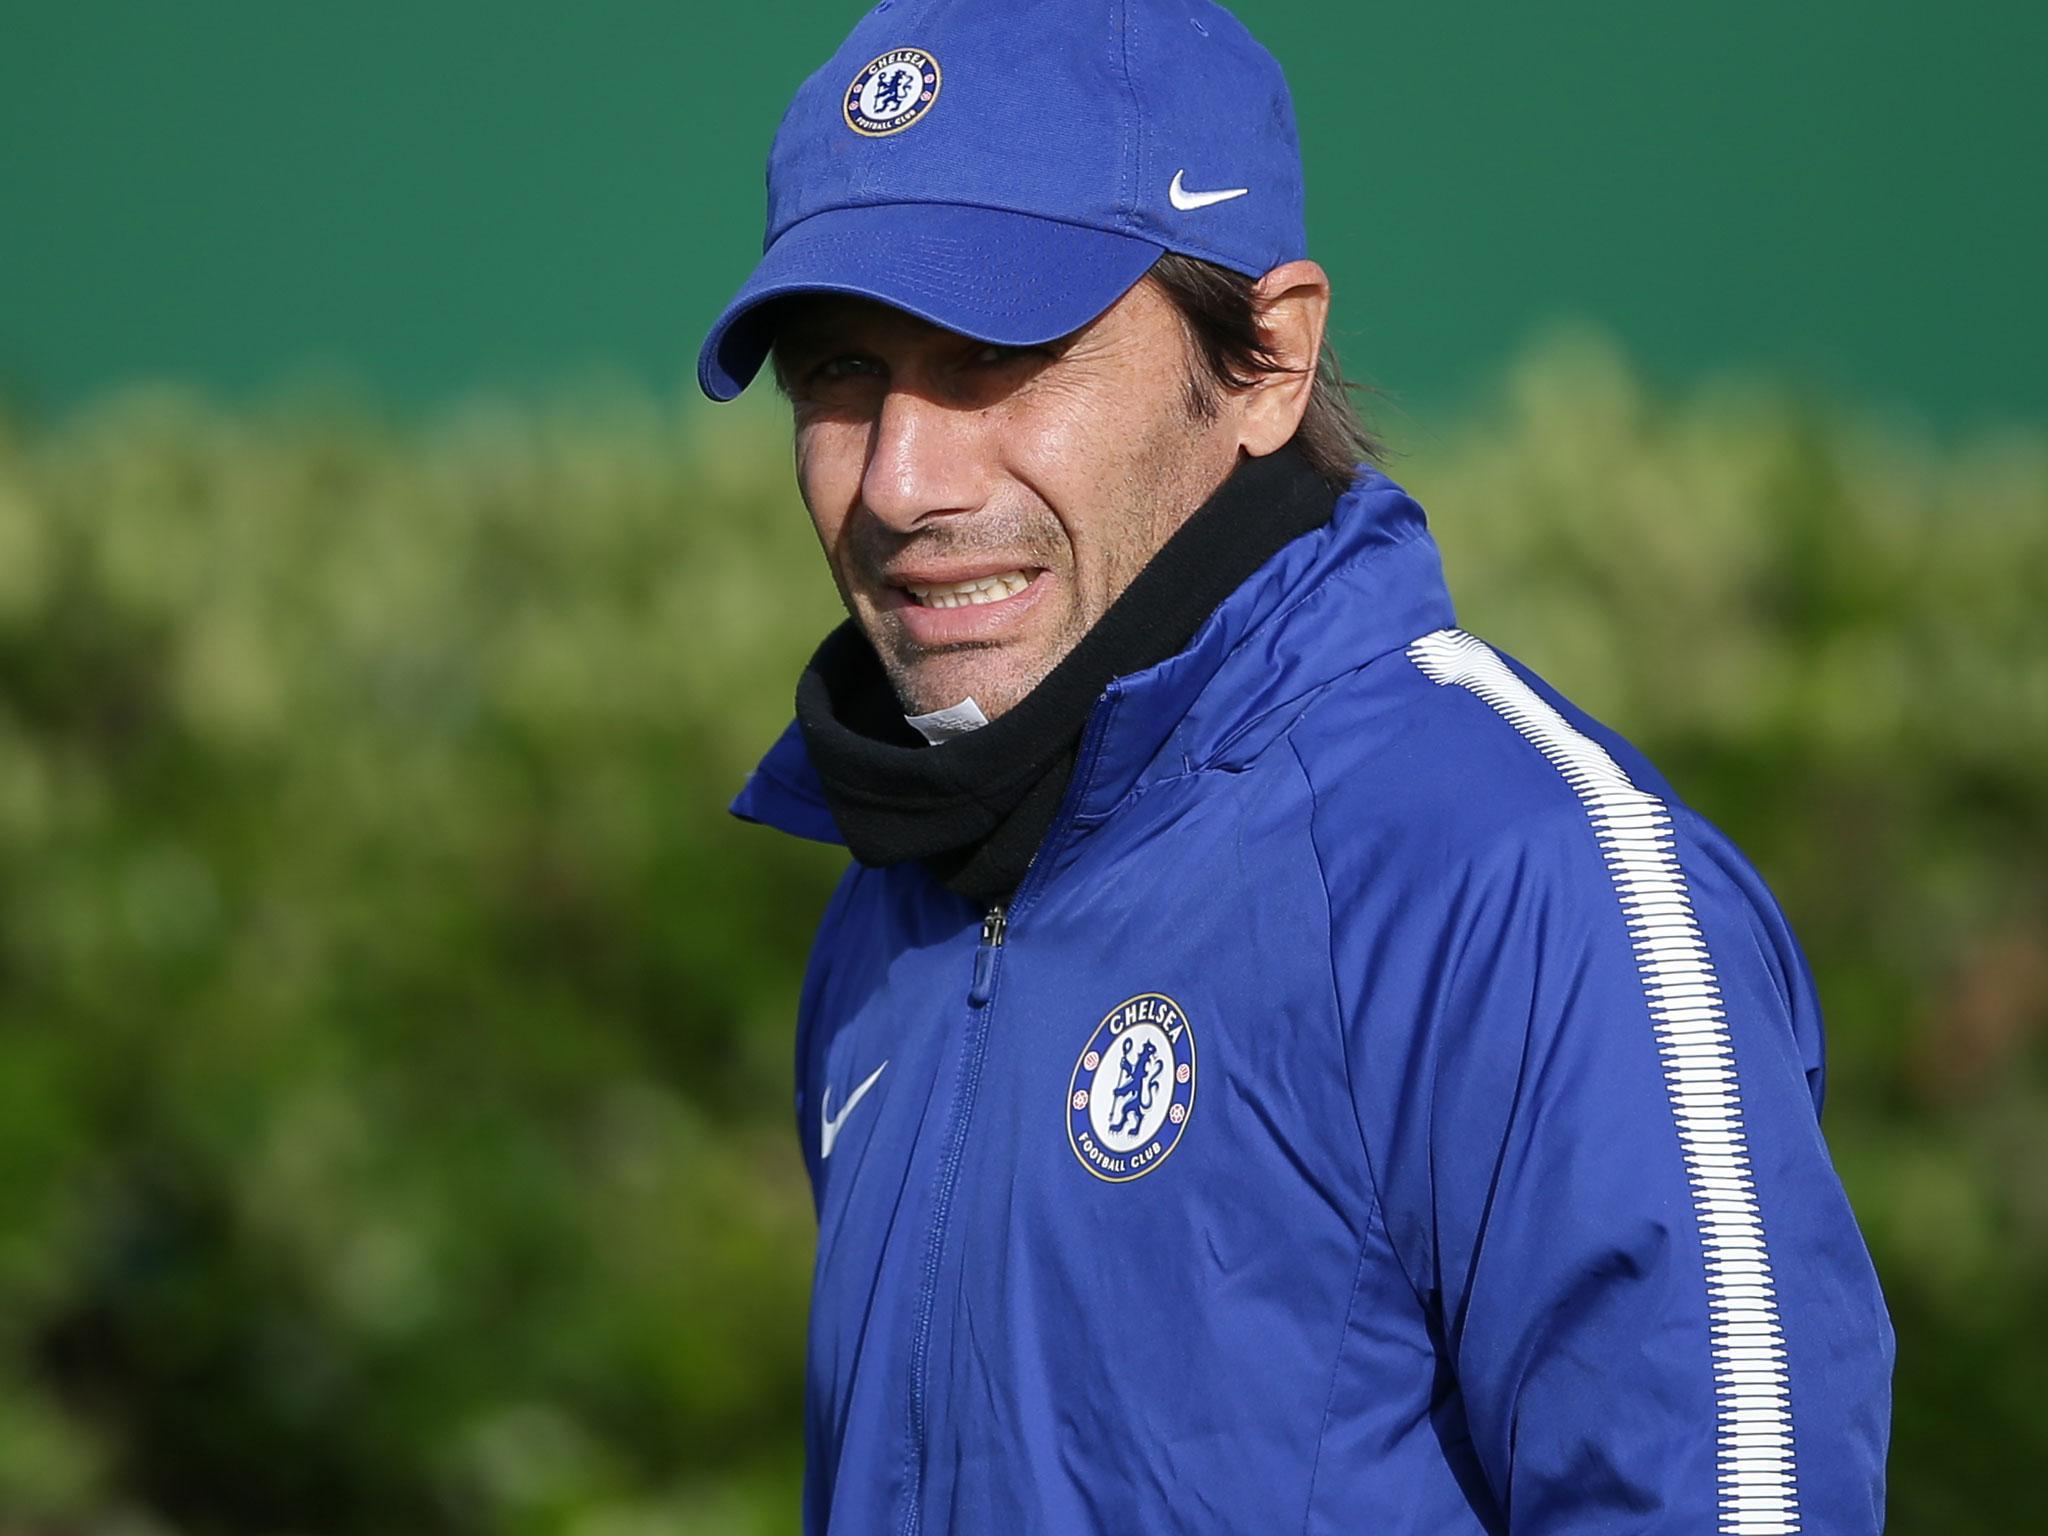 Antonio Conte's side face a pivotal week both at home and in Europe